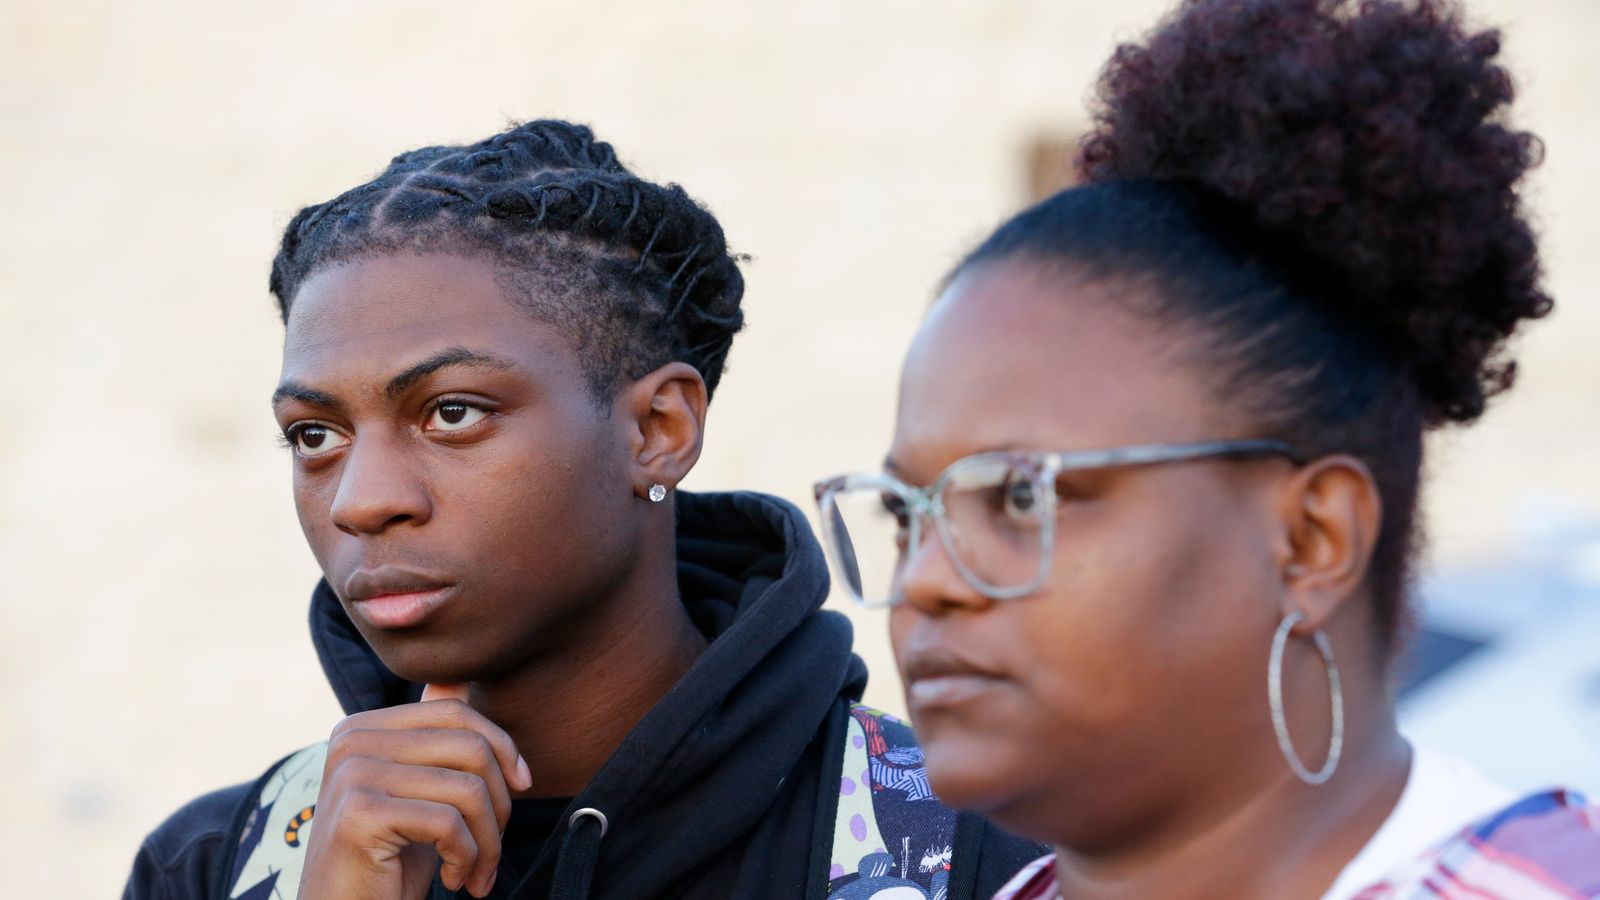 Darryl George: Family sues state governor after student suspended over dreadlocks